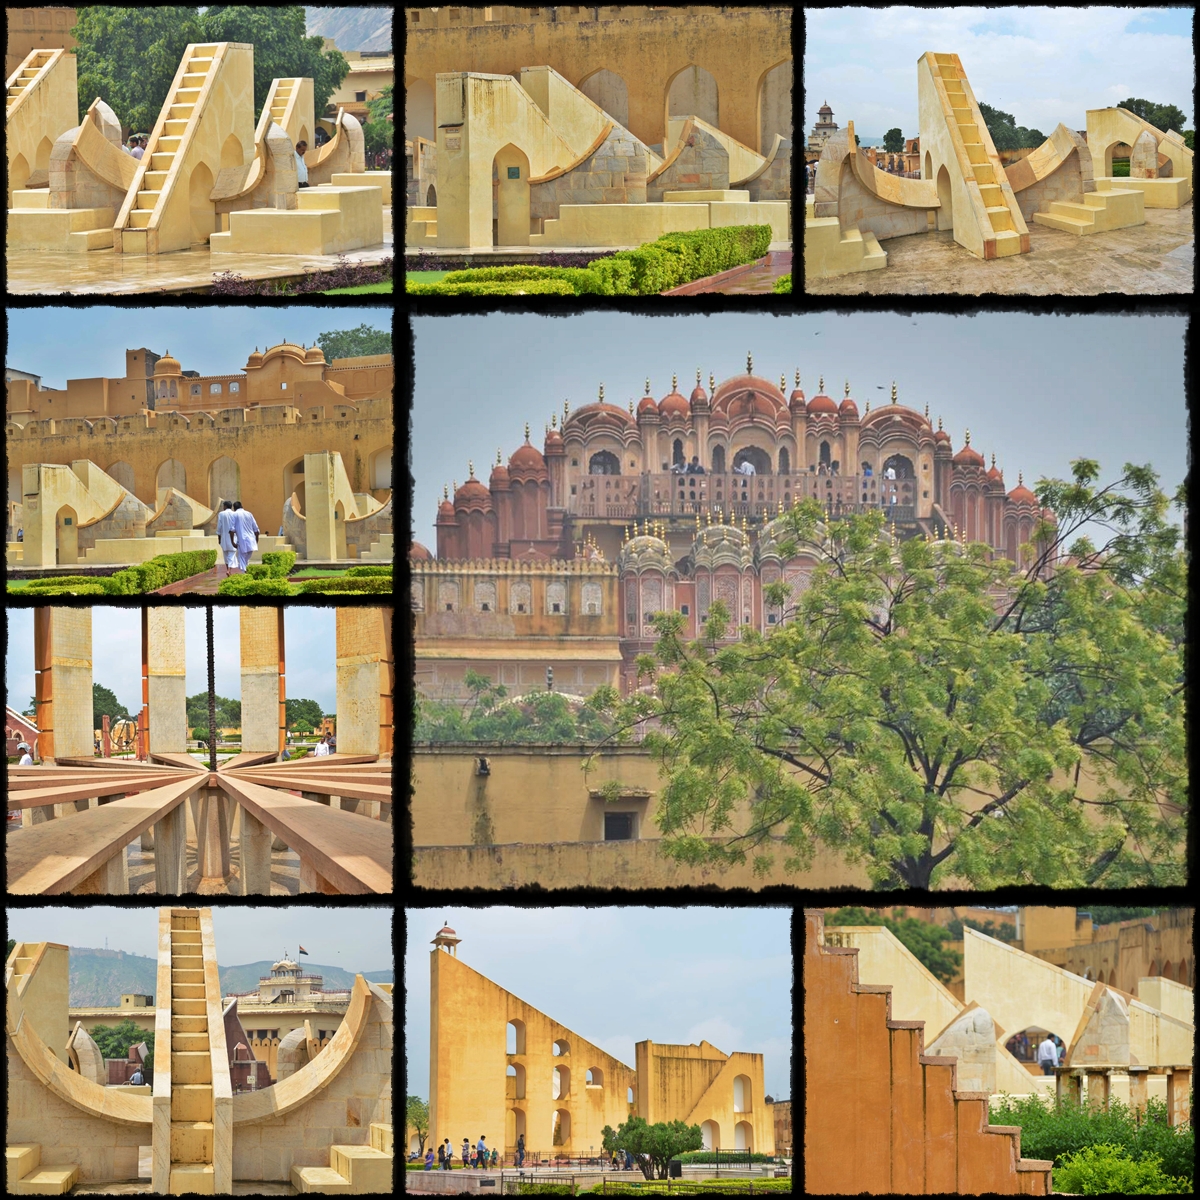 THE ROSE CITY OF JAIPUR > AMBER FORT > HAVA MAHAL (called Palace of Winds or Palace of the Breeze) > JANTAR MANTAR ASTRONOMICAL OBSERVATORY > JAIPUR CITY PALACE